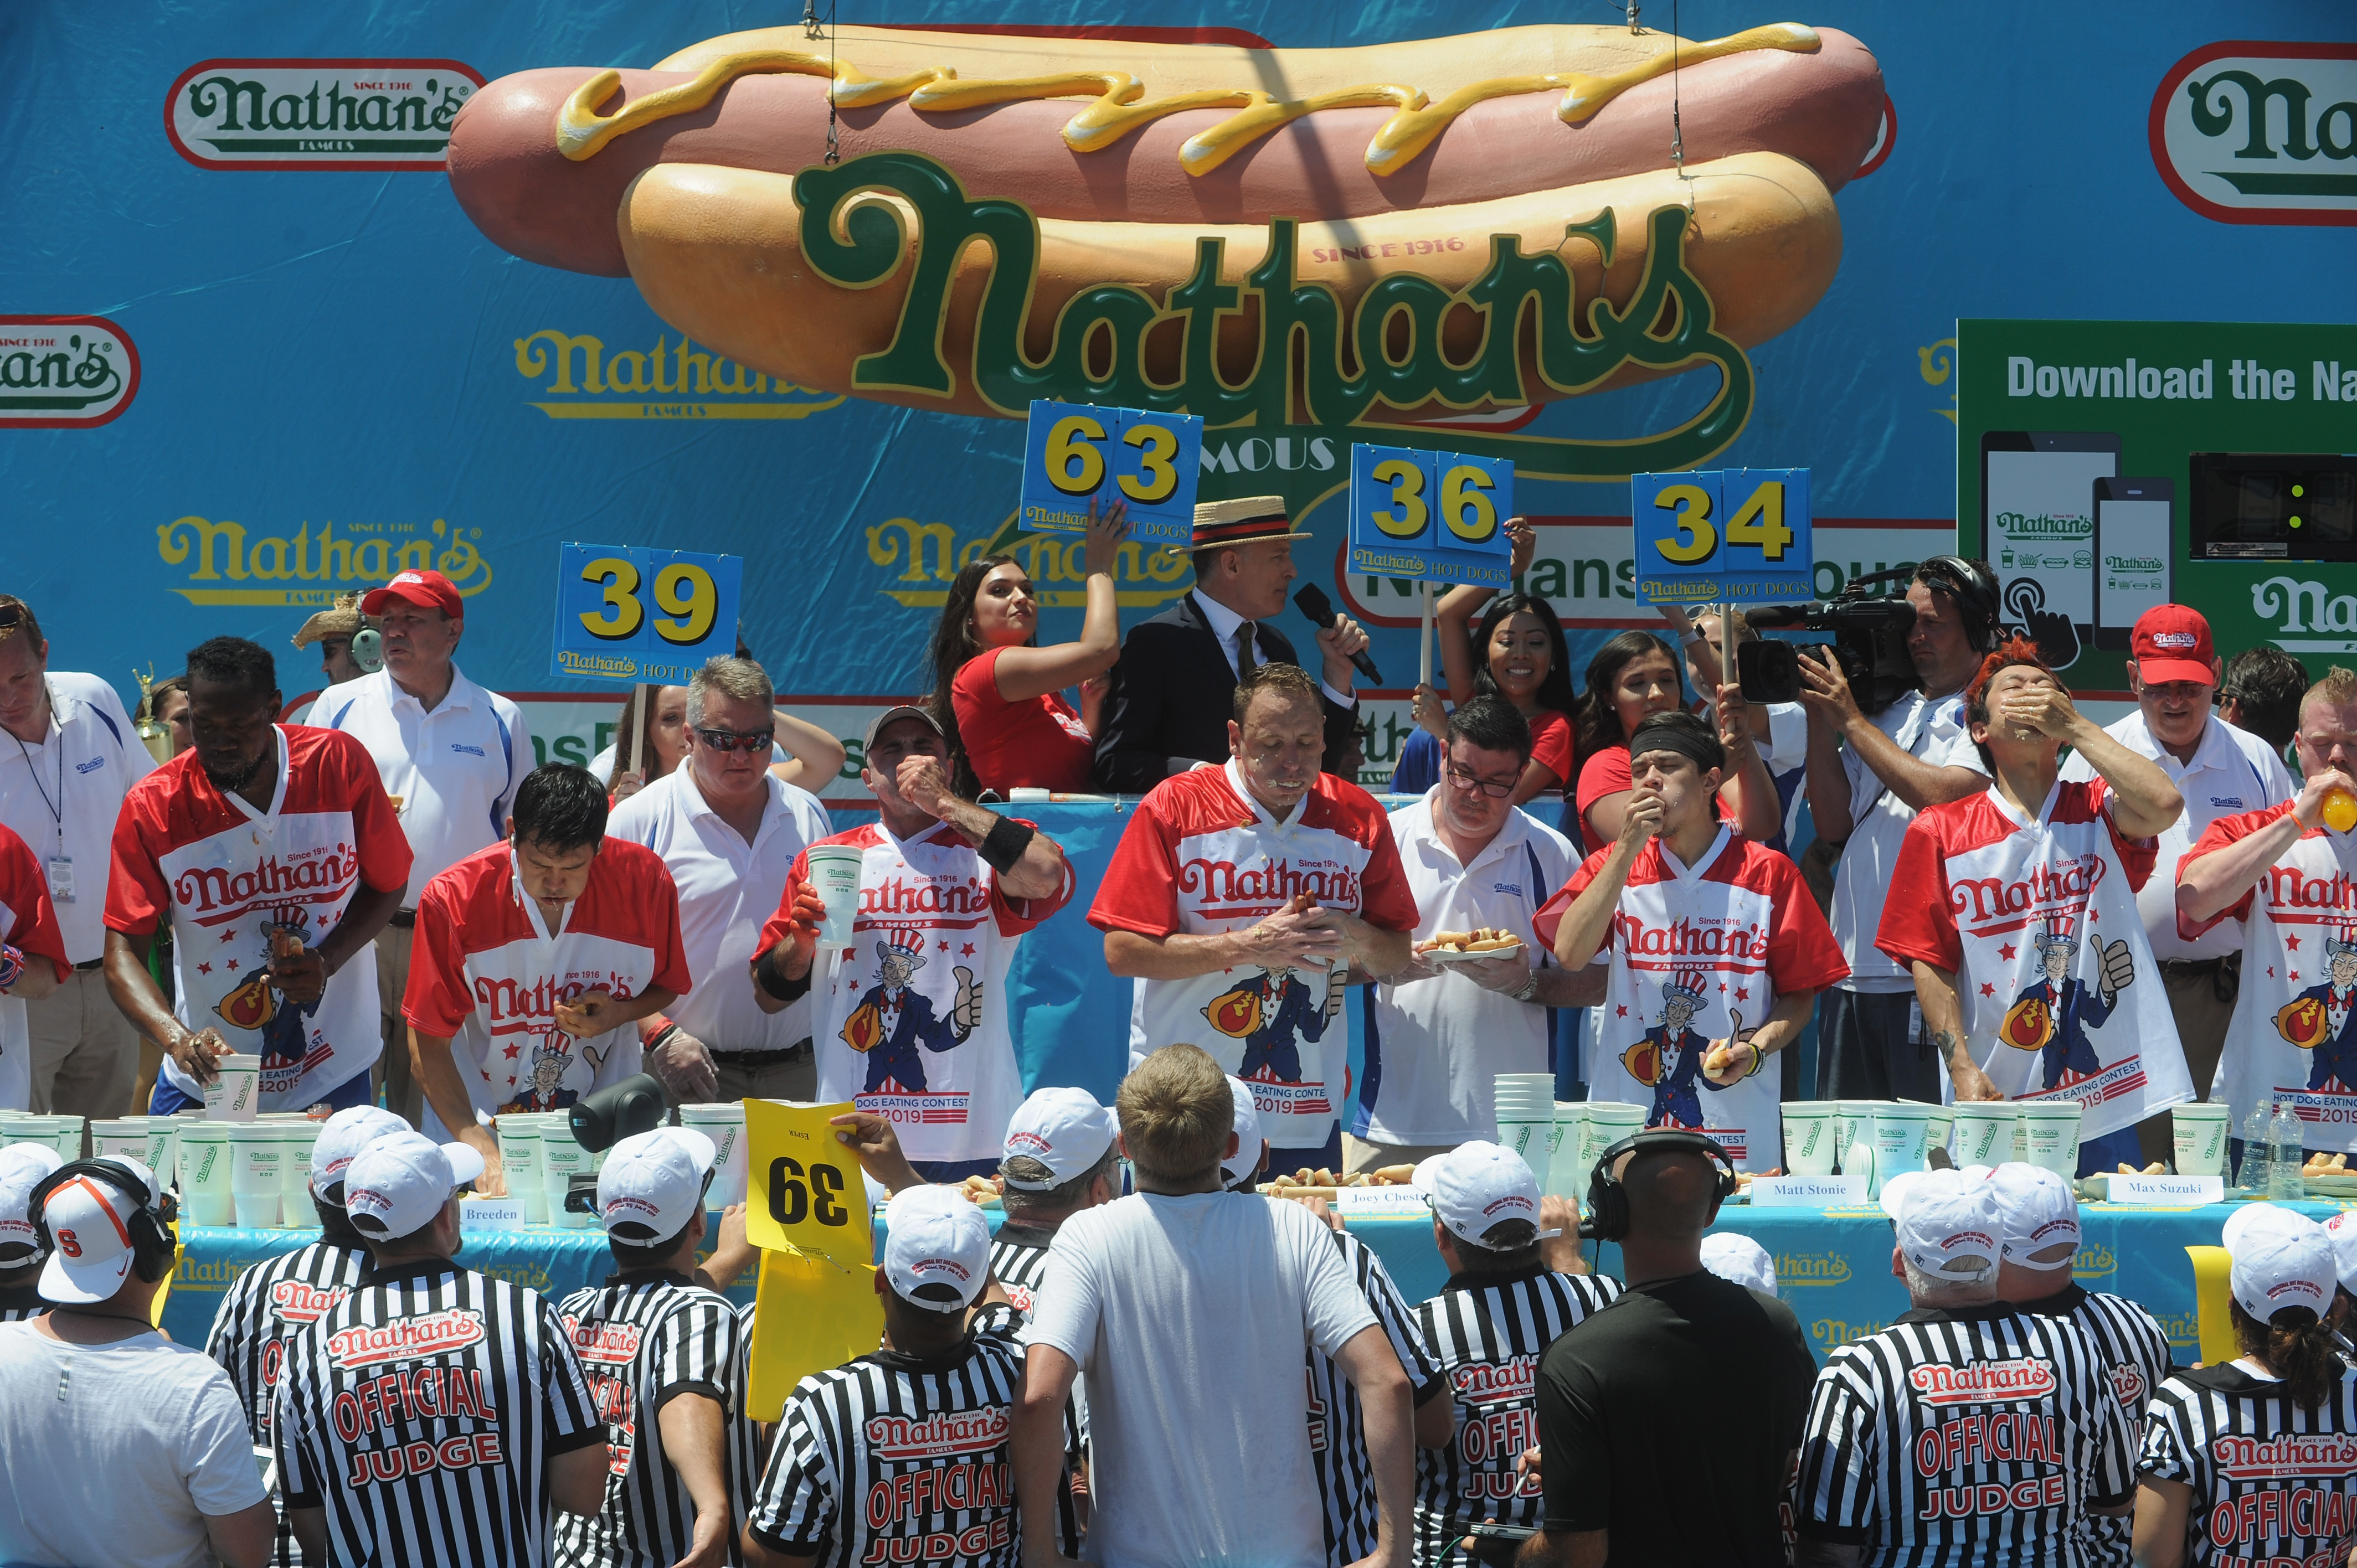 Joey “Jaws” Chestnut wins the 2019 Nathans Famous Fourth of July International Hot Dog Eating Contest with 71 hot dogs at Coney Island on July 4, 2019 in the Brooklyn borough of New York City.